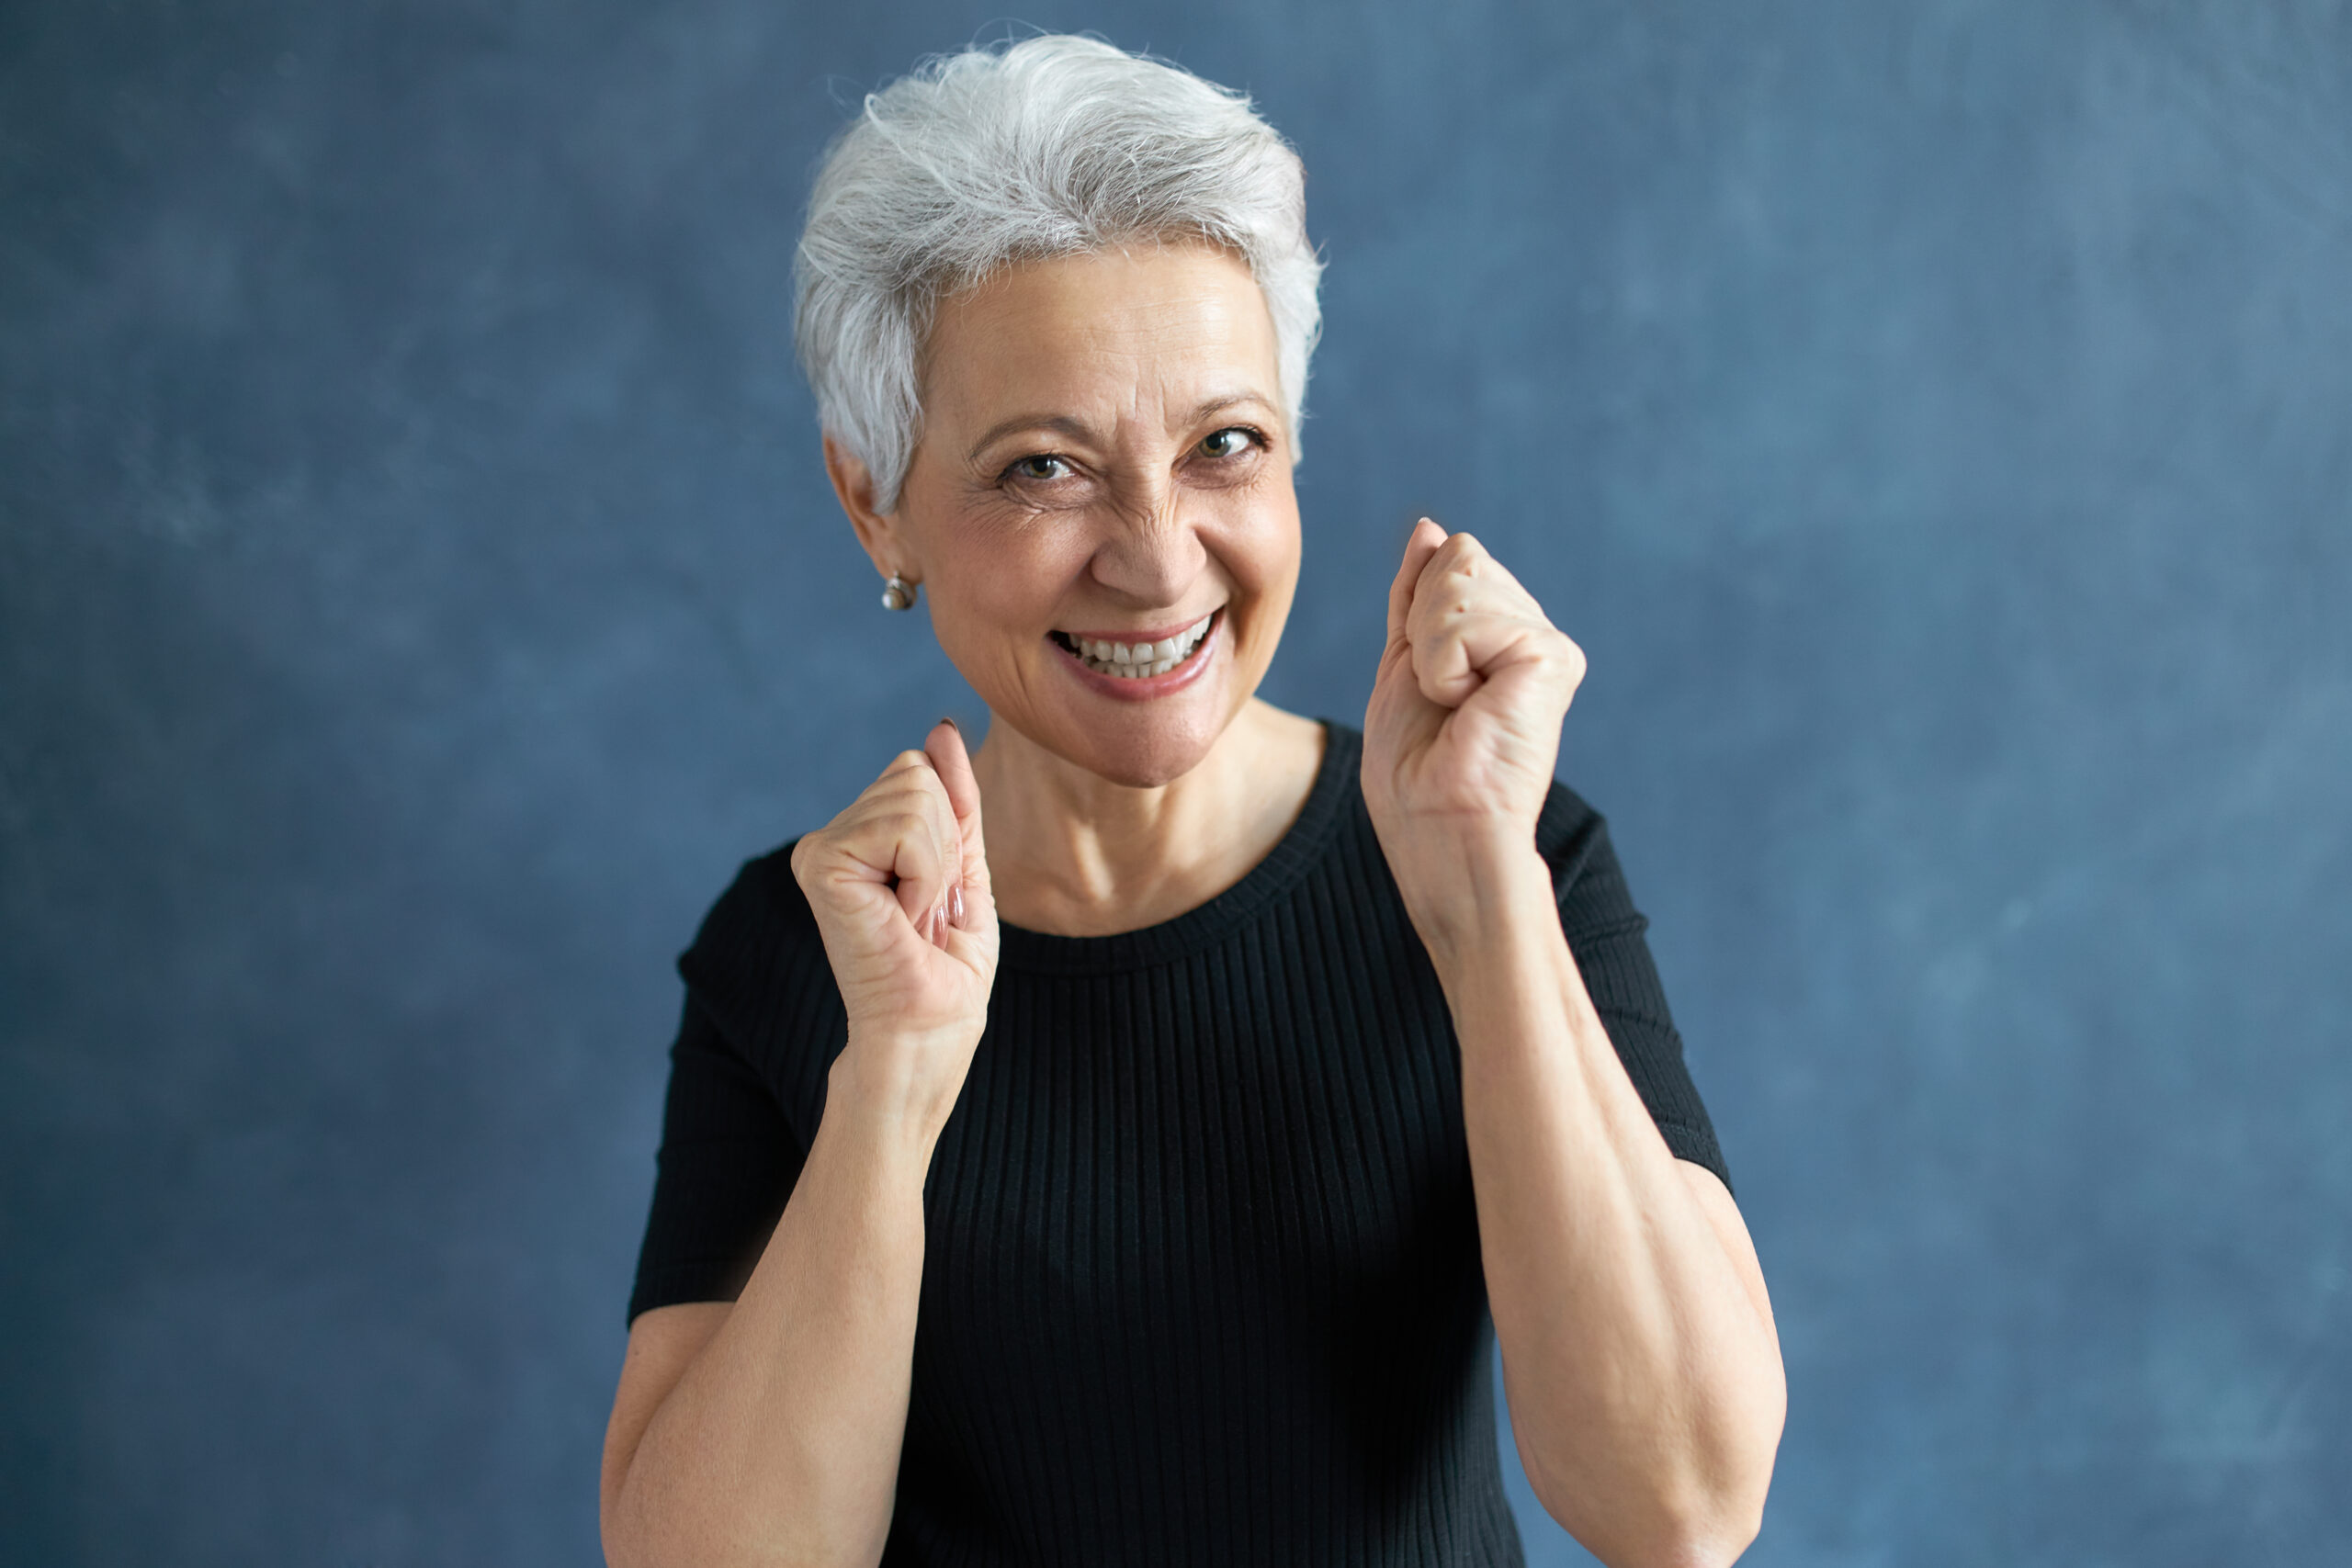 Portrait of overjoyed happy female pensioner with stylish haircut looking at camera with cheerful broad smile, clenching fists, expressing excitement. Human facial expressions and reaction